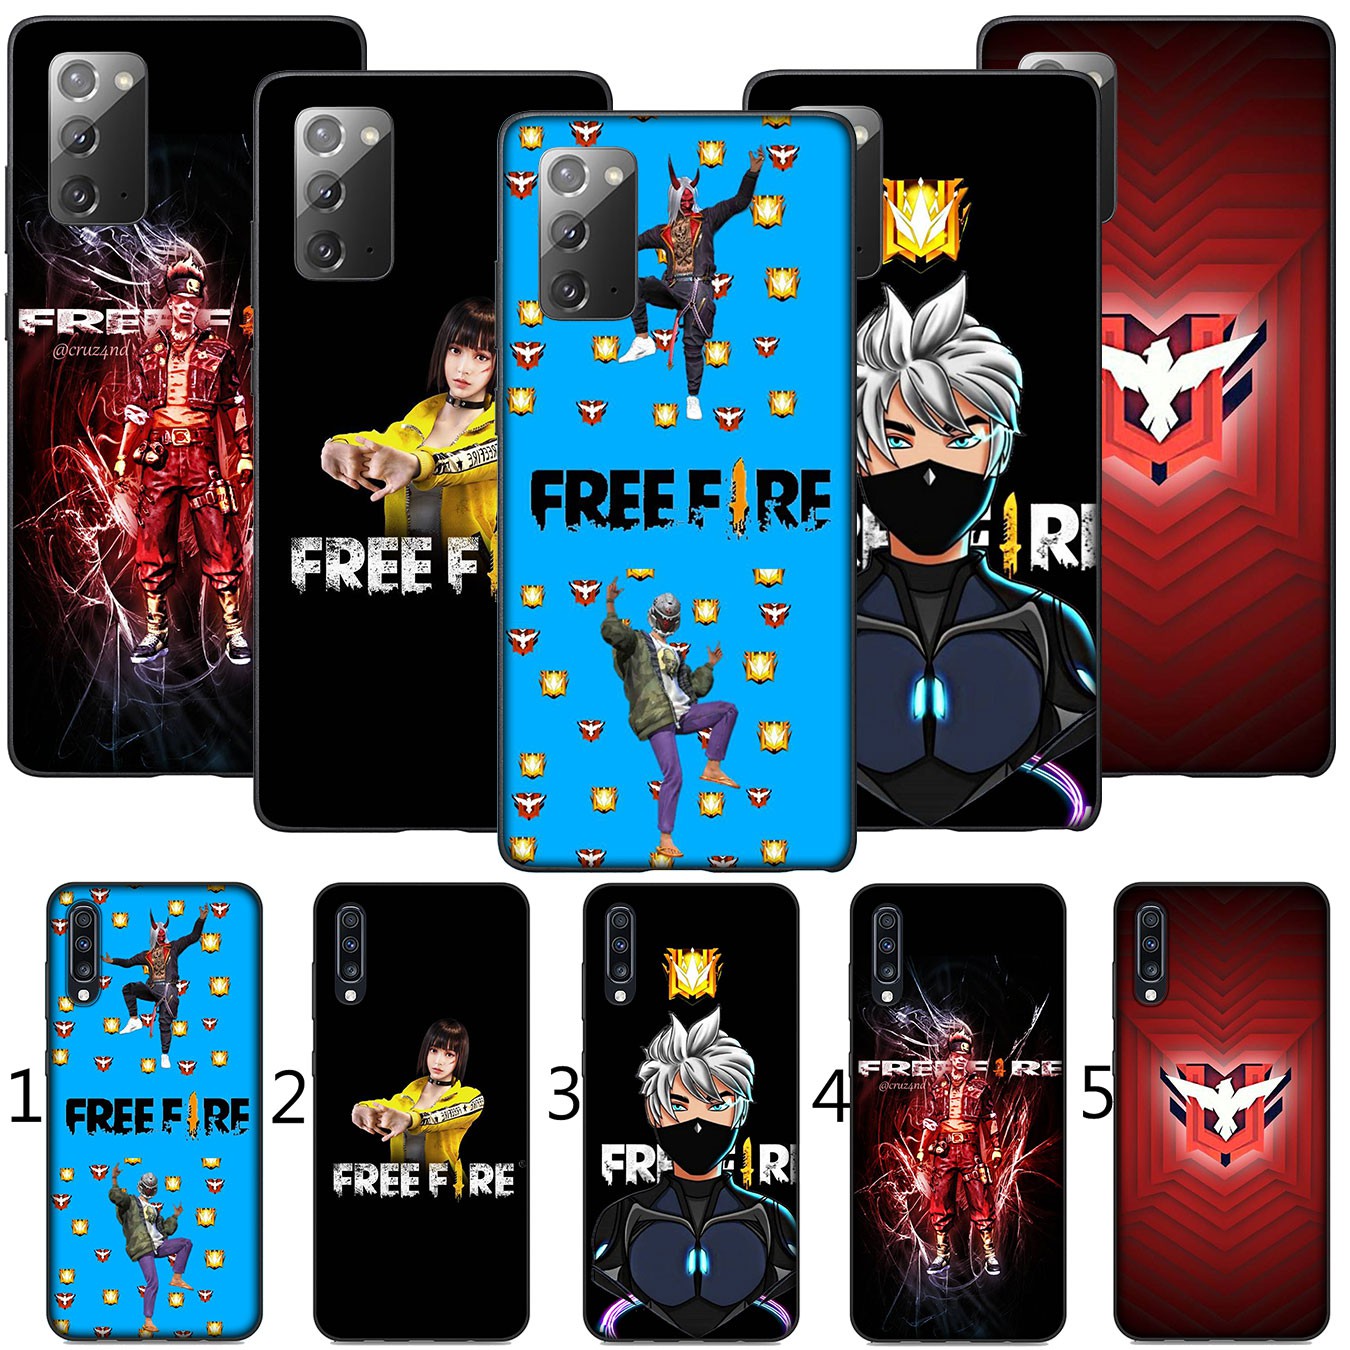 Samsung Galaxy S21 Ultra S8 Plus F62 M62 A2 A32 A52 A72 S21+ S8+ S21Plus Casing Soft Silicone Phone Case Free Fire cool Cover